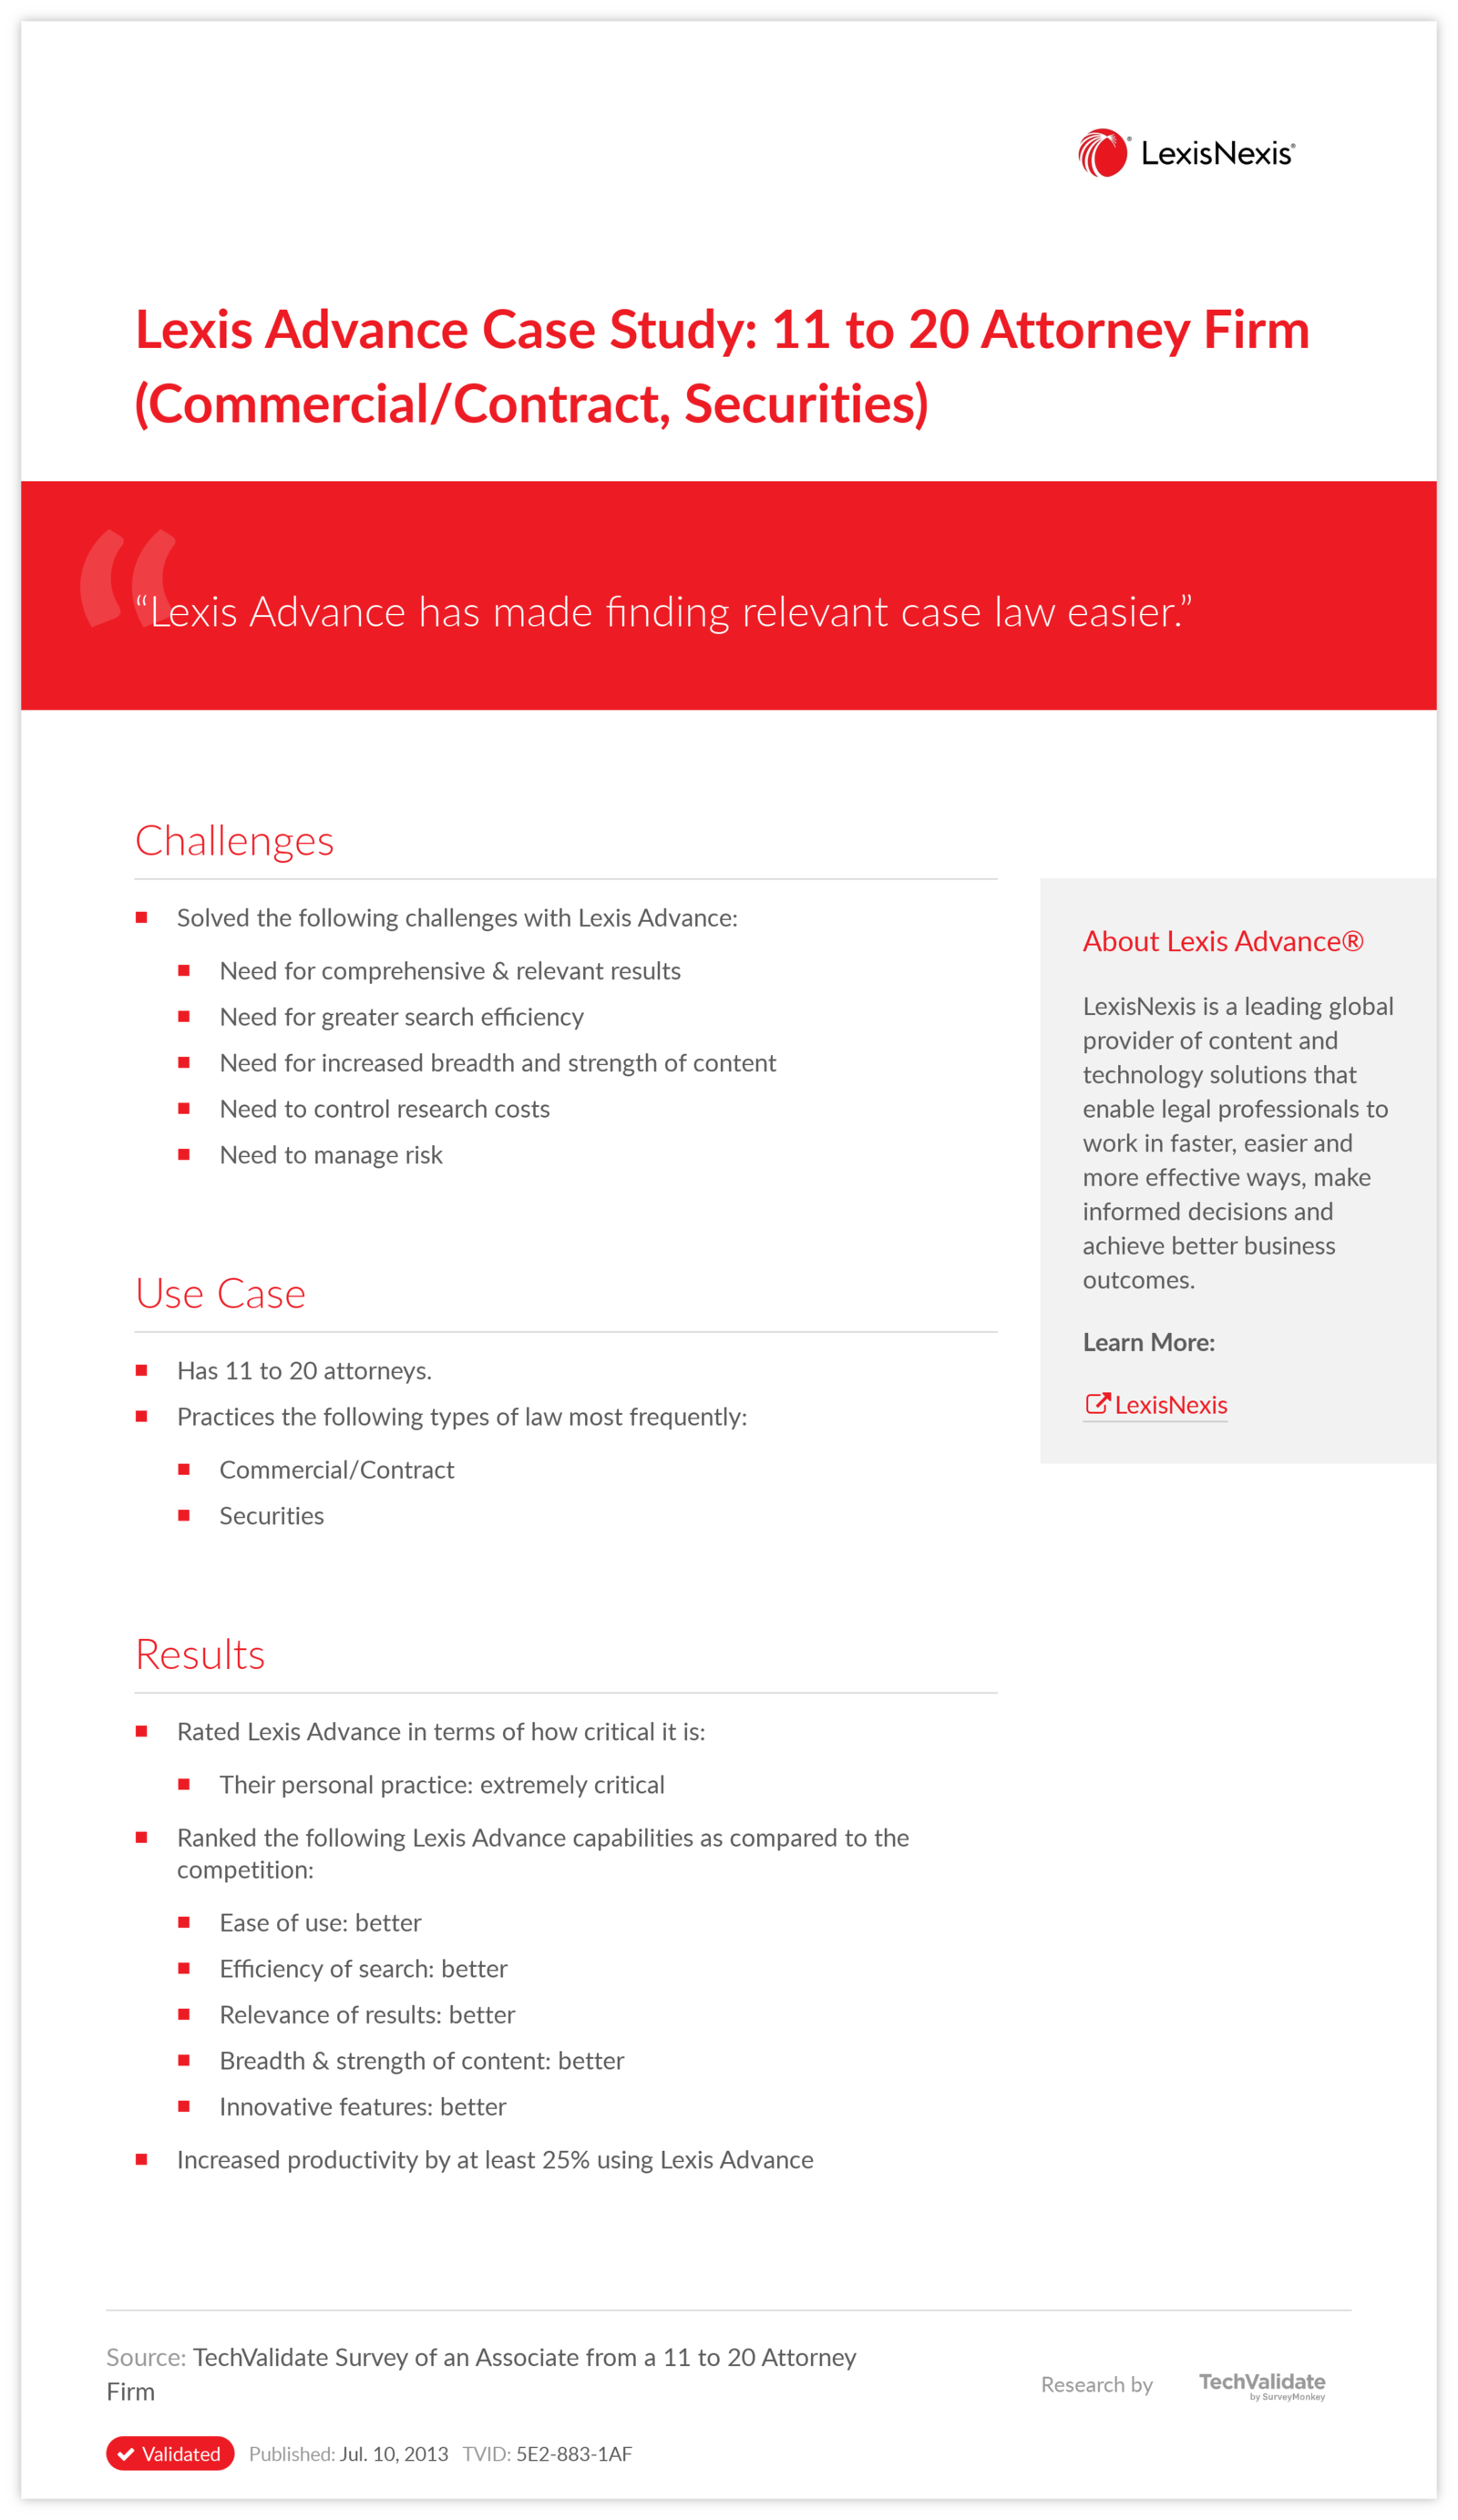 Lexis Advance Case Study: 11 to 20 Attorney Firm (Commercial/Contract, Securities)